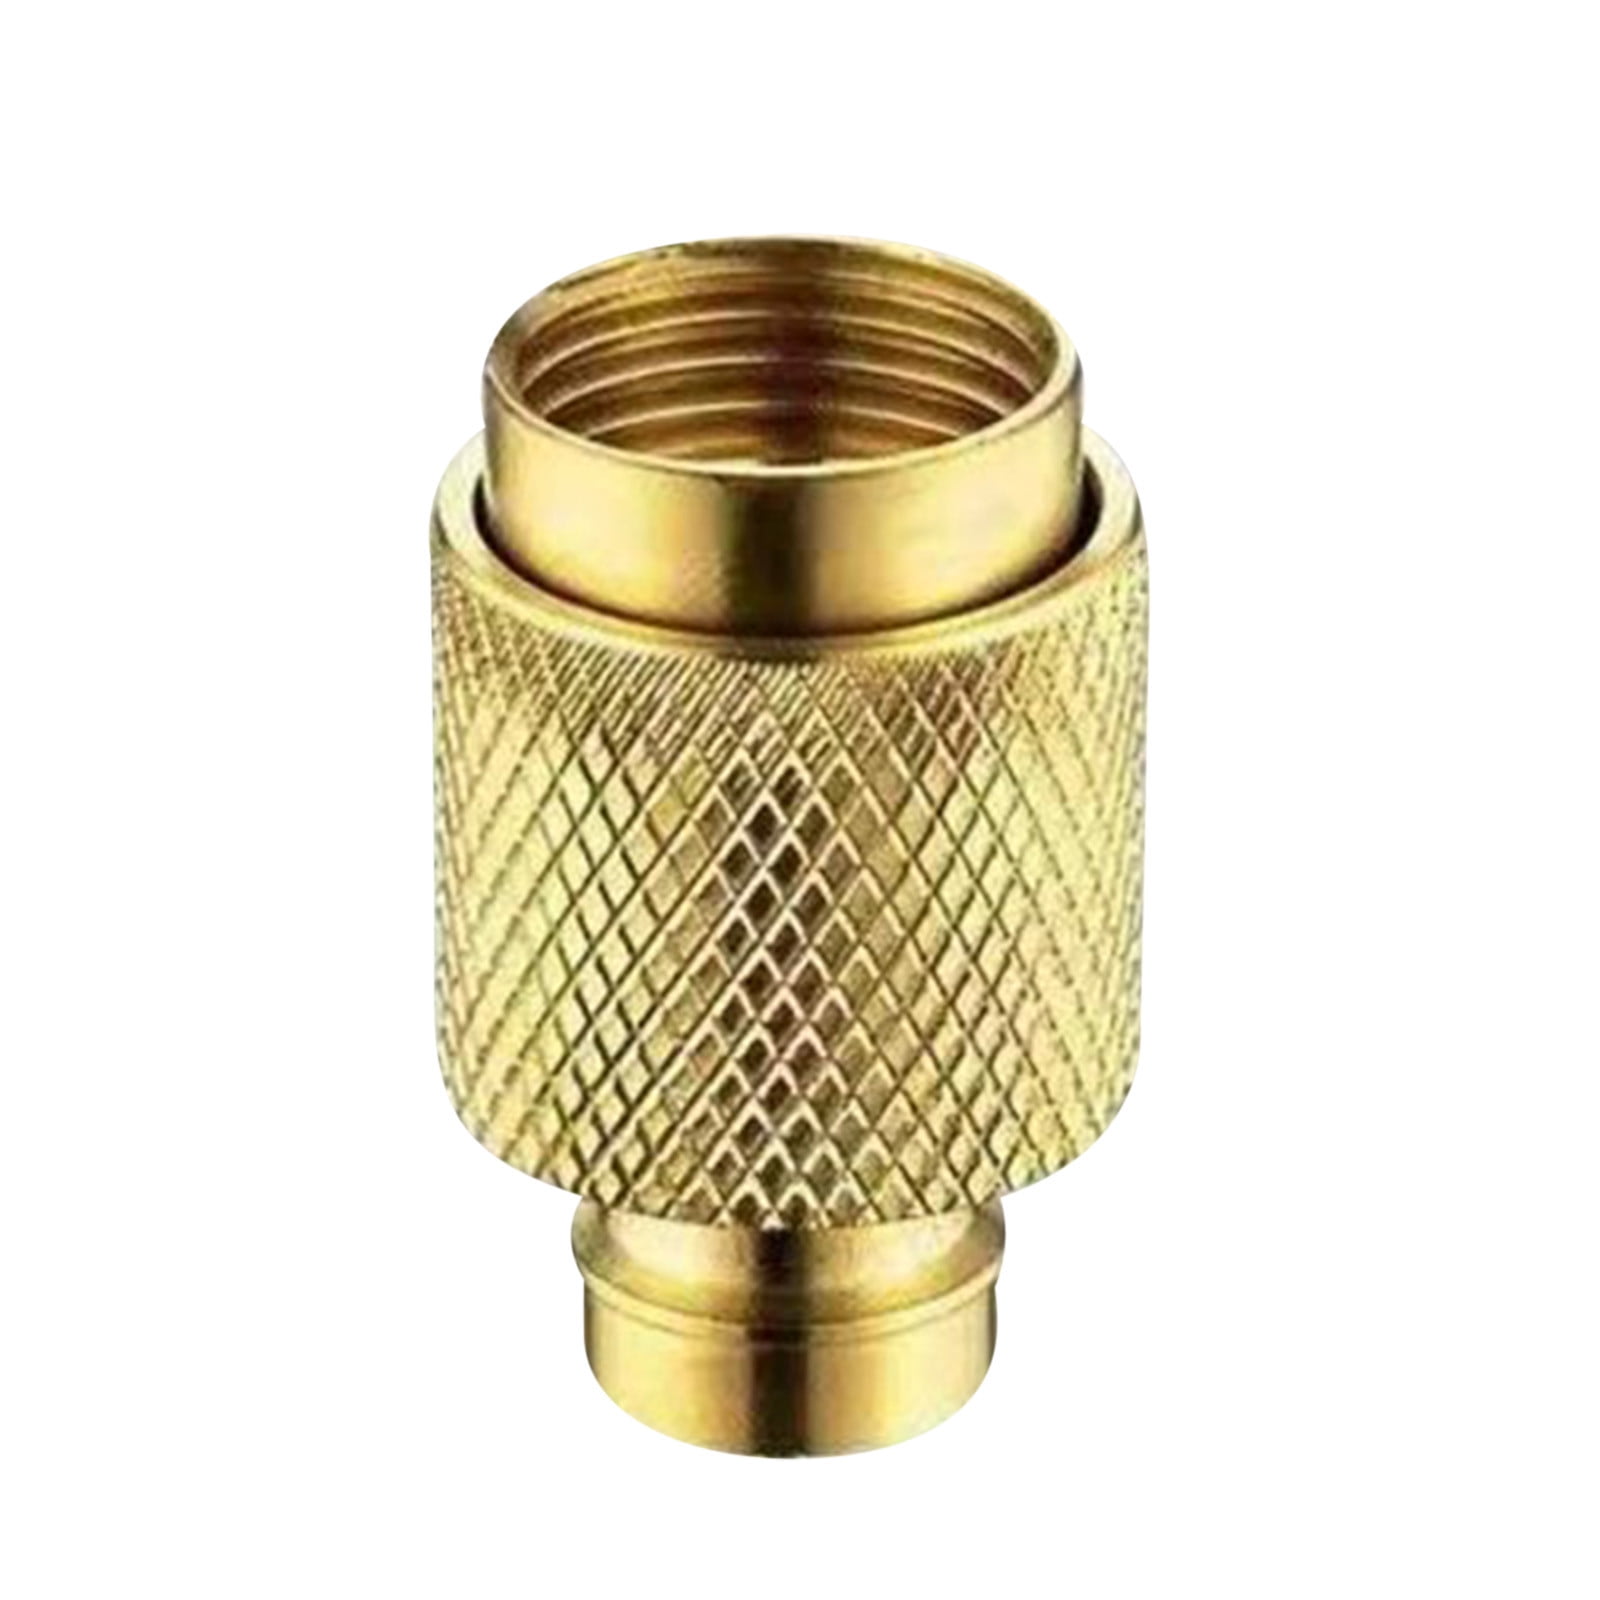 Details about   Tap Connector Adaptor Universal Garden Water Fit Hose Pipe Tap Brass Adapter 